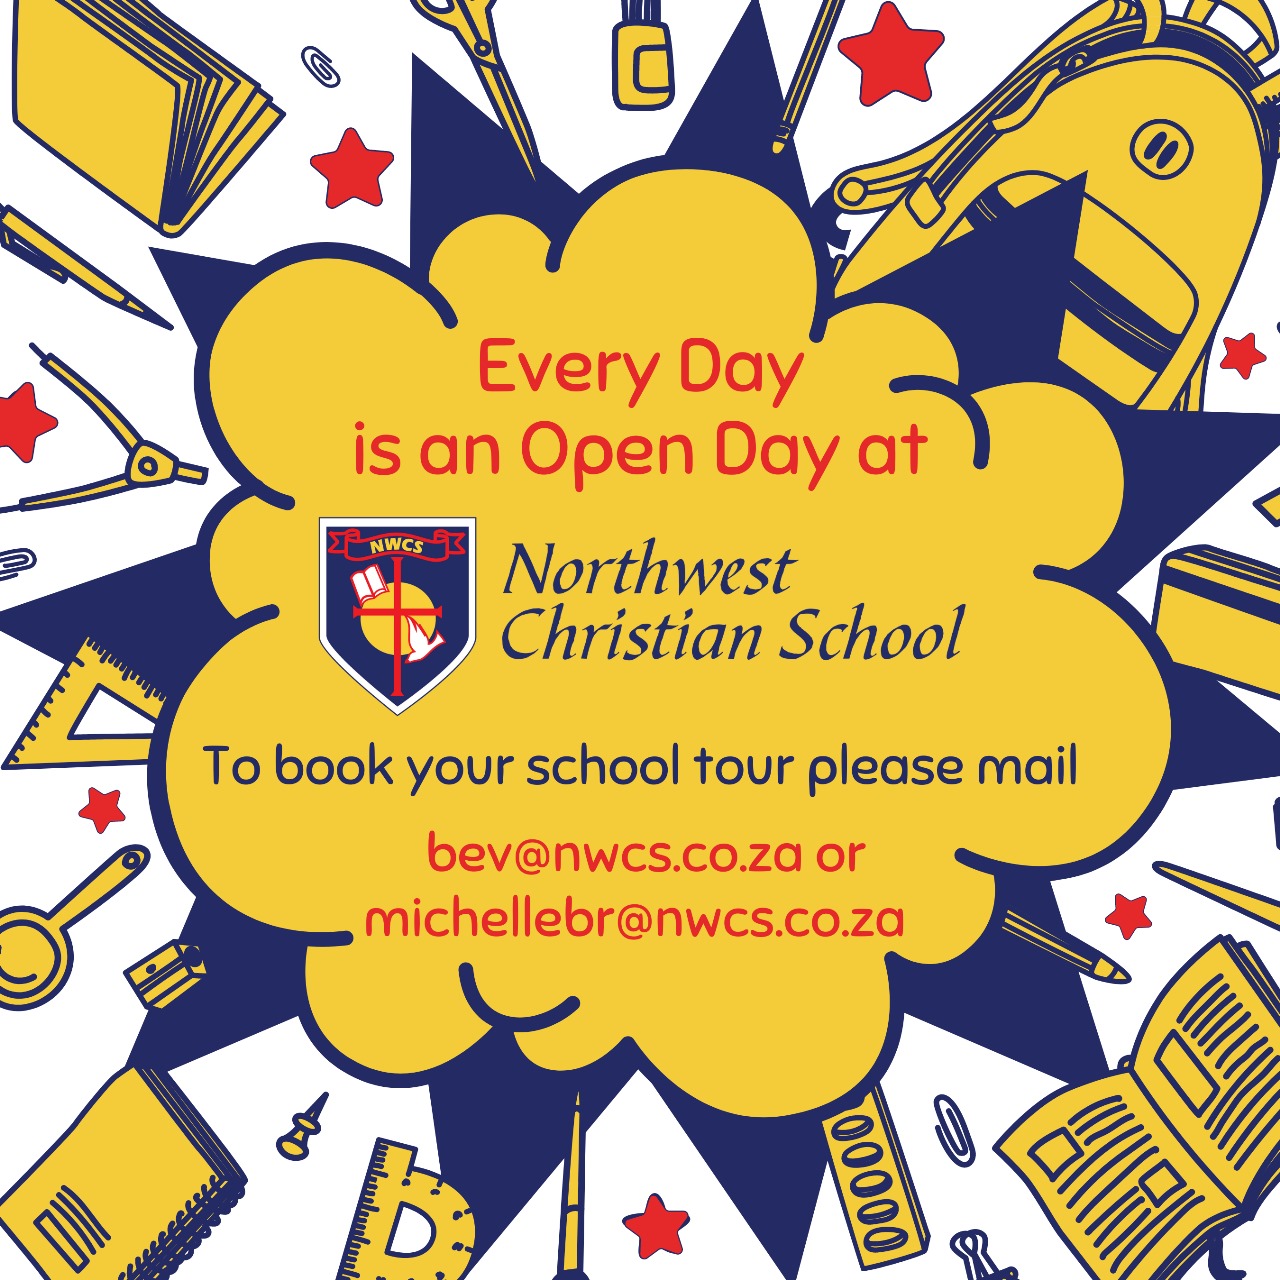 Every Day is Open Day